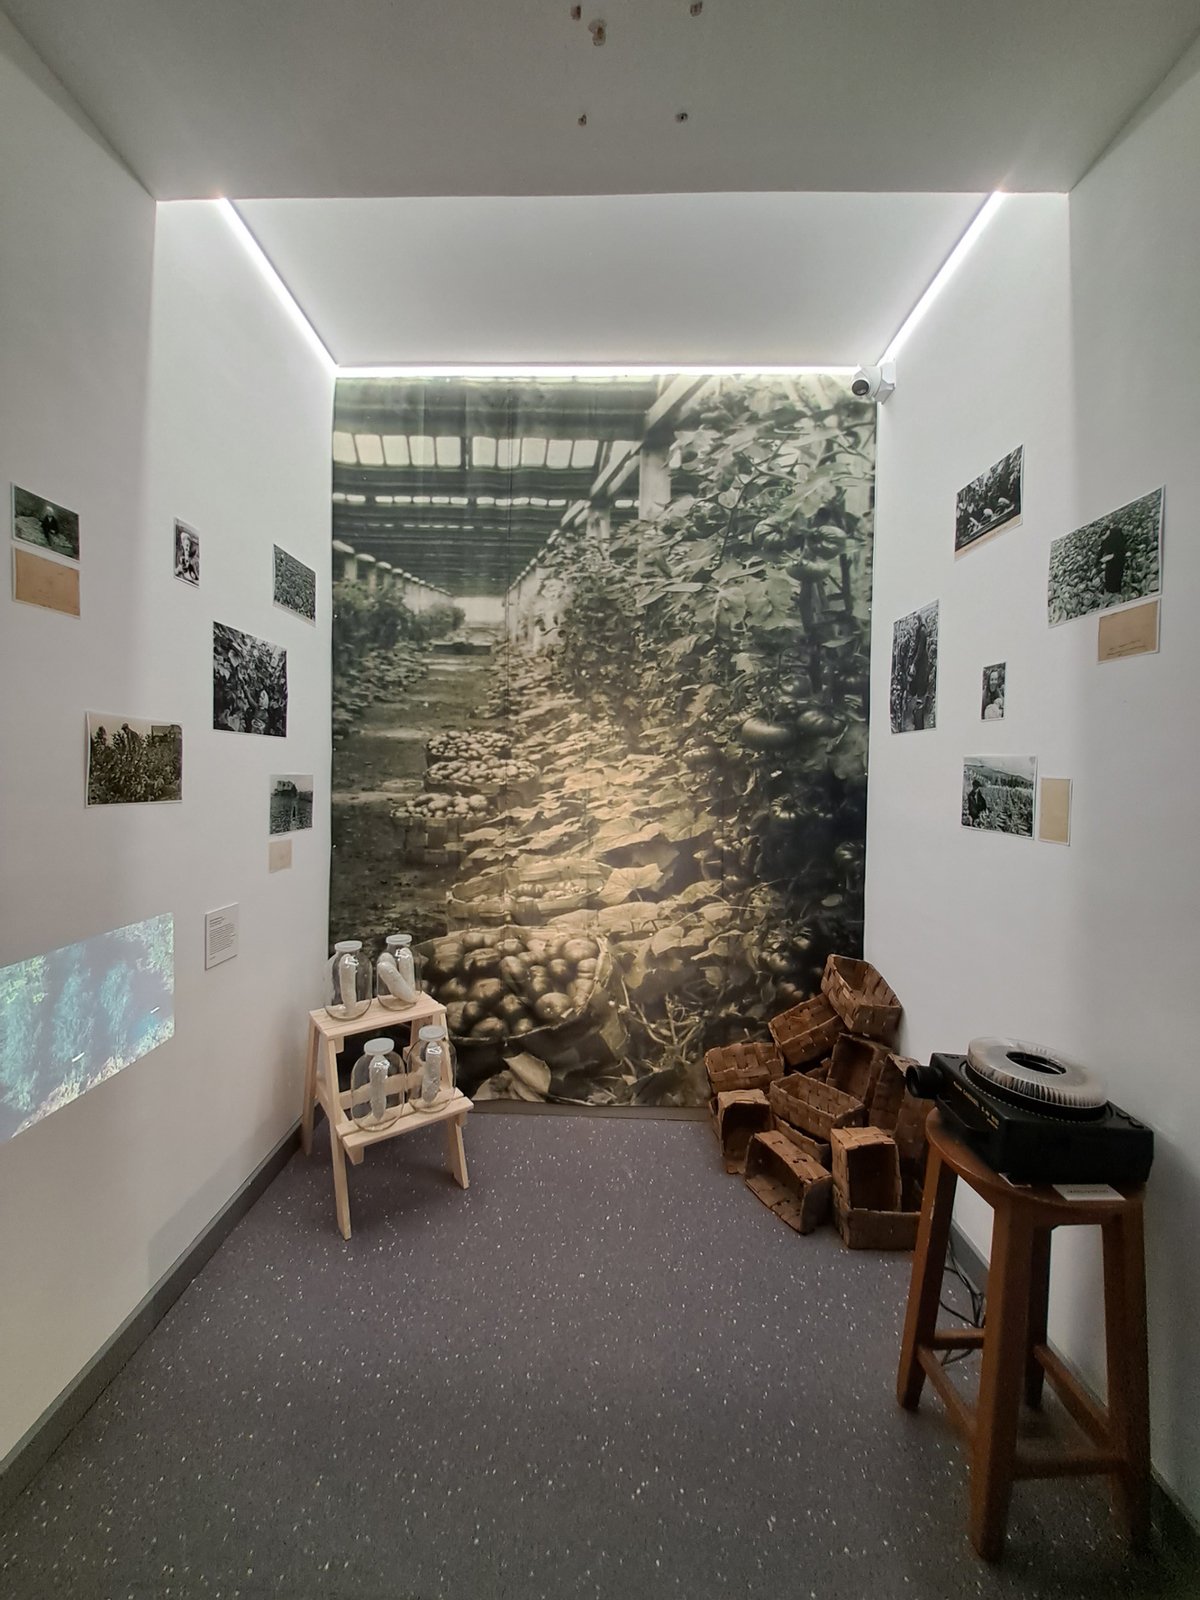 Installation view of the exhibition/research project by curator Katya Isaeva,&nbsp;Centenary of Northern AgricultureSiyanie Center for Contemporary Art, Apatity.&nbsp;2023Courtesy of the artist